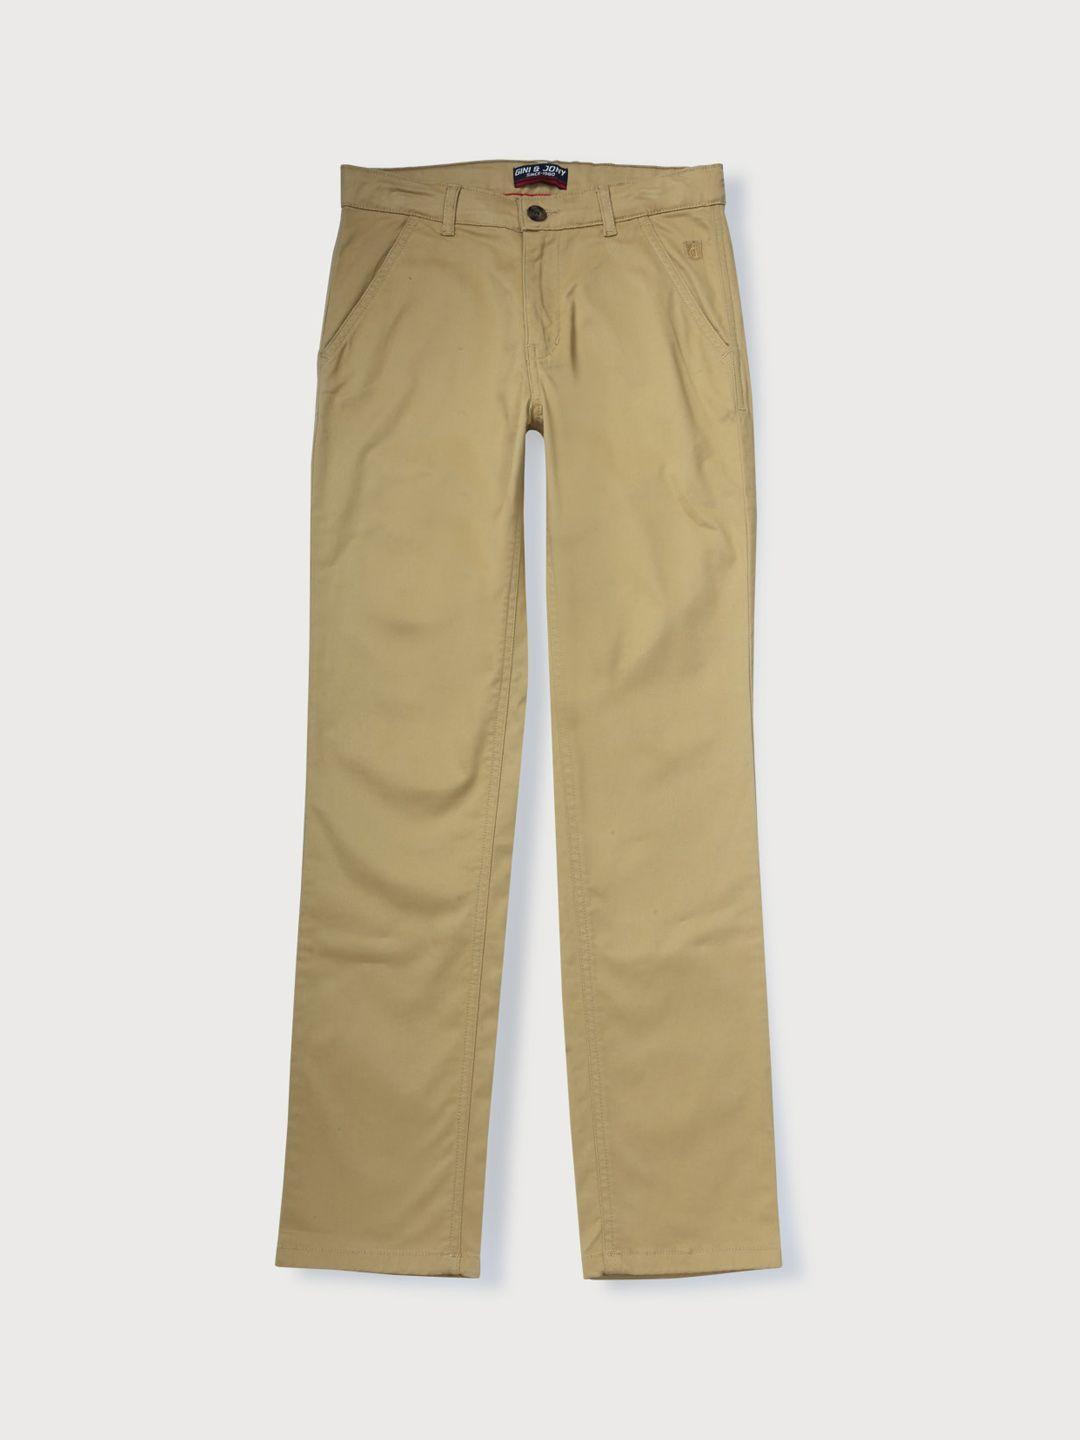 Gini and Jony Boys Cotton Chinos Trousers